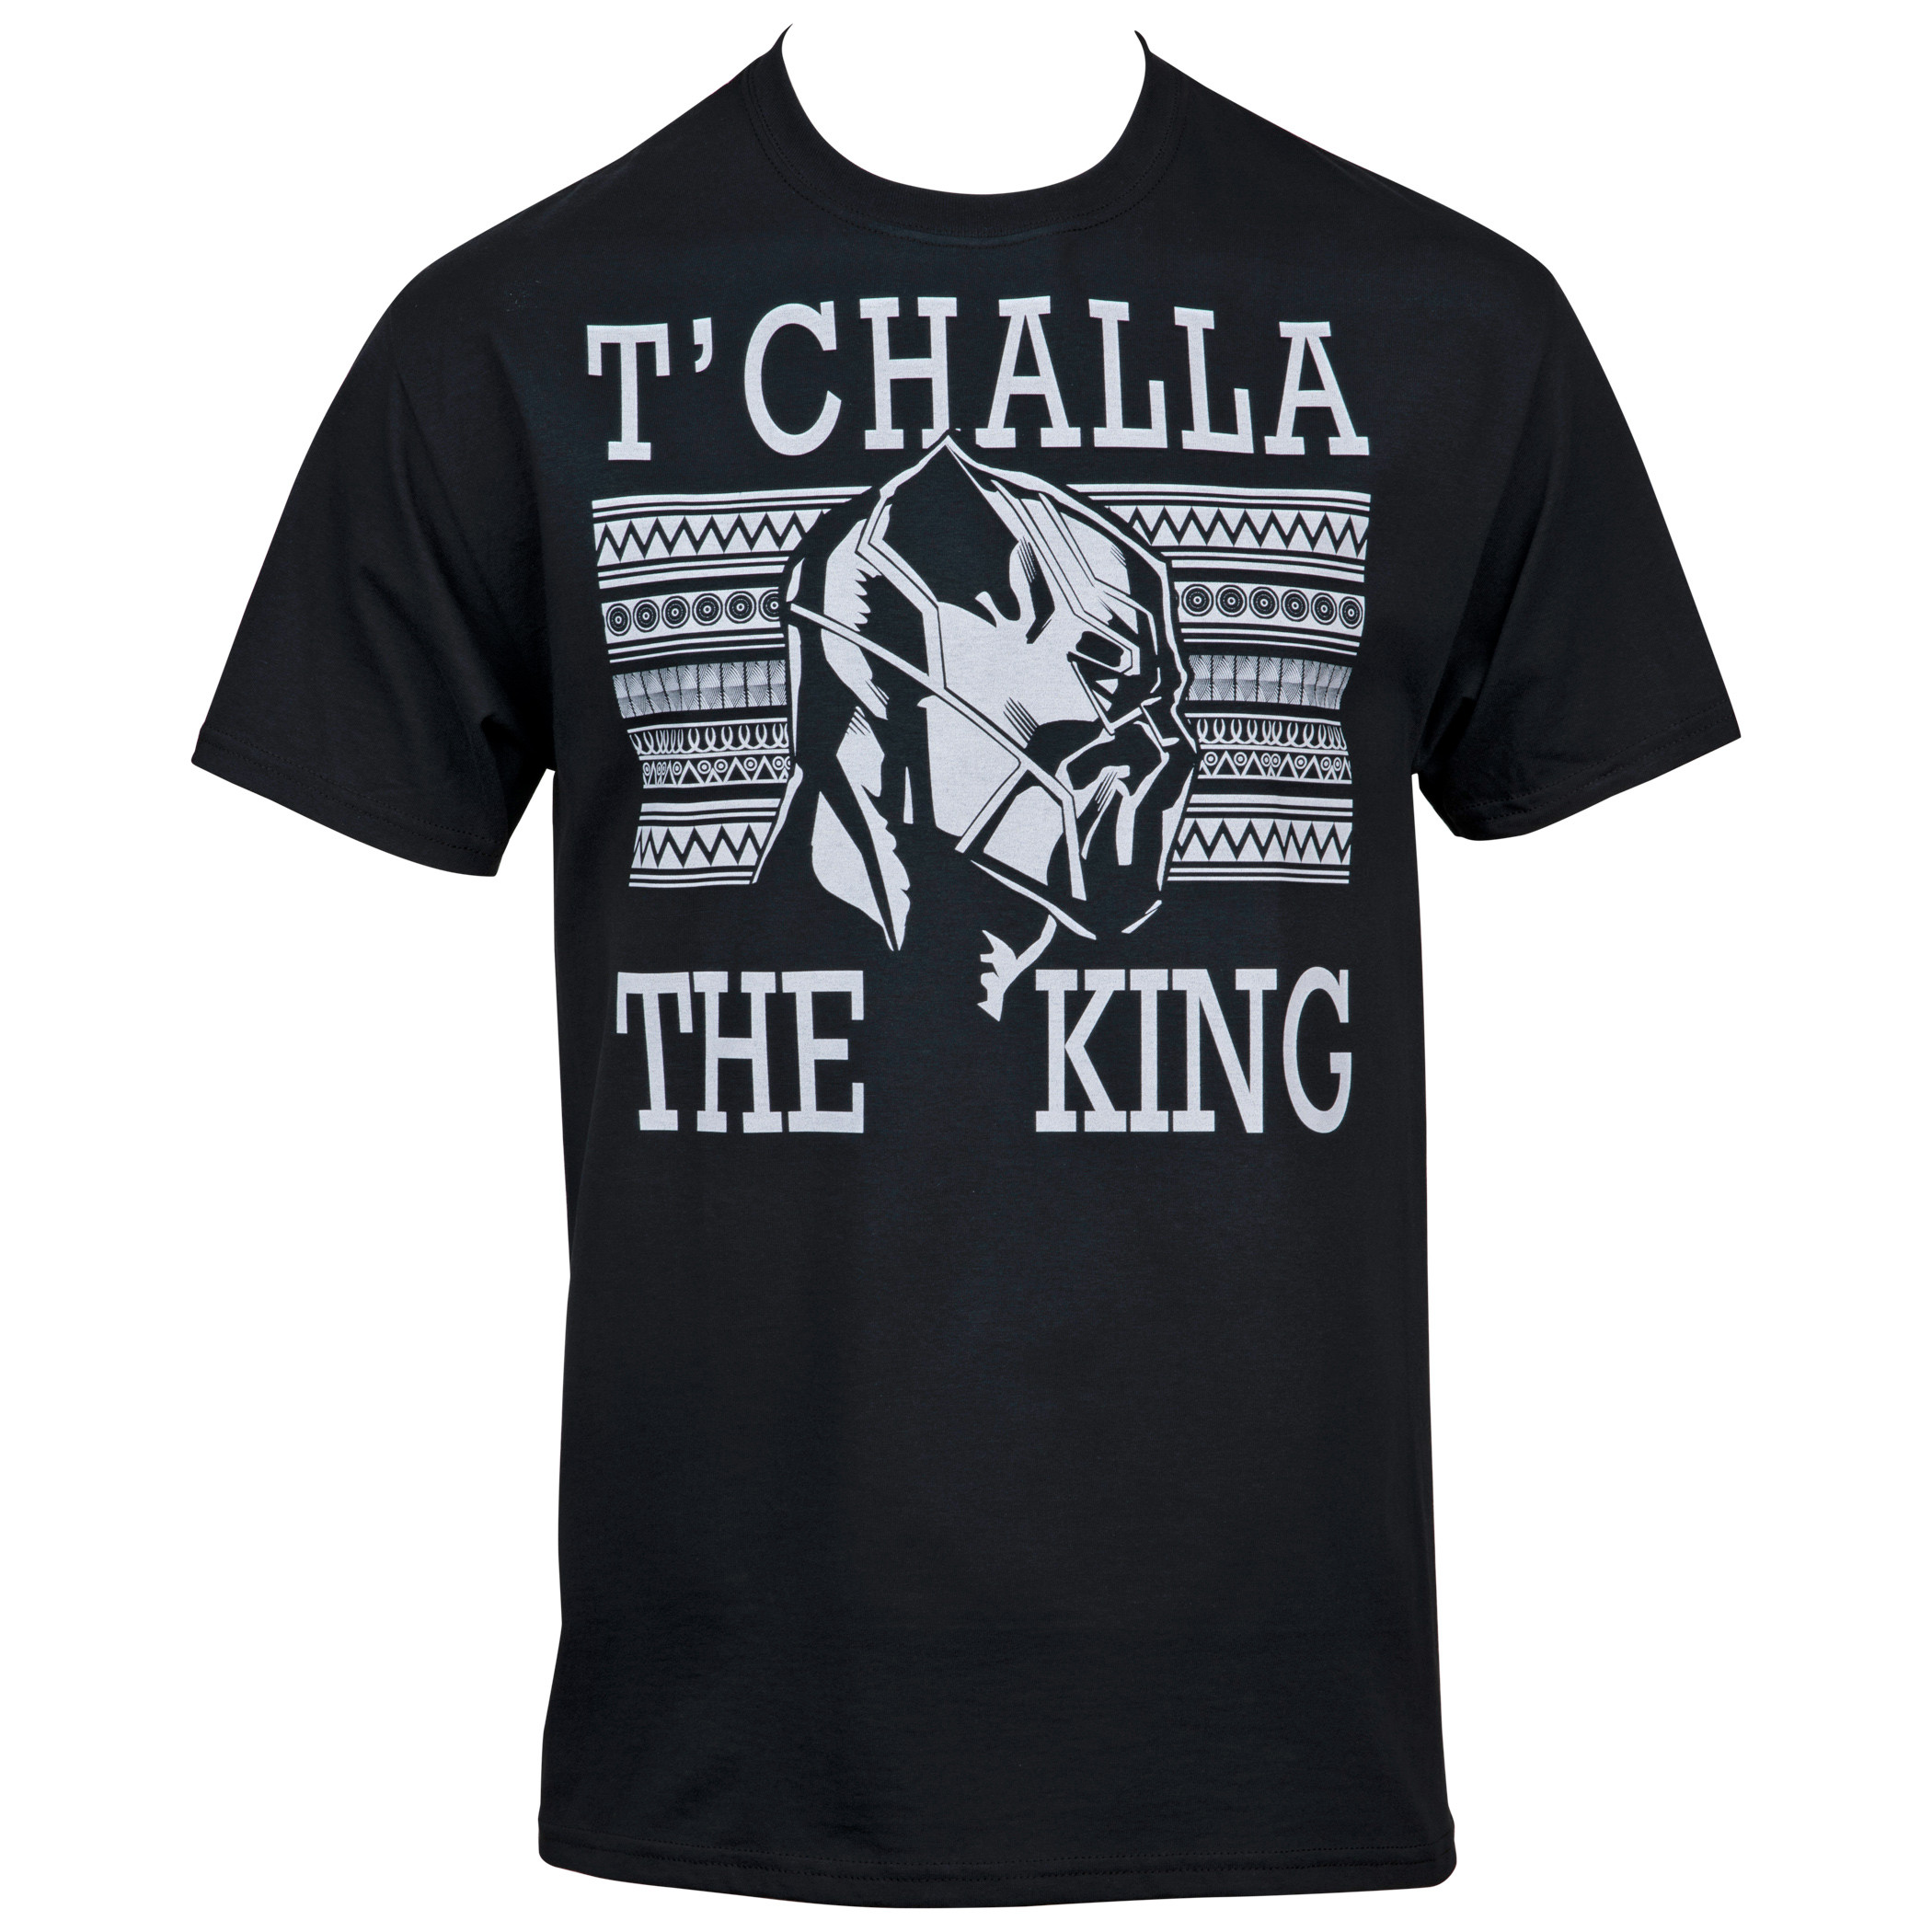 Marvel Black Panther T'Challa The King T-Shirt